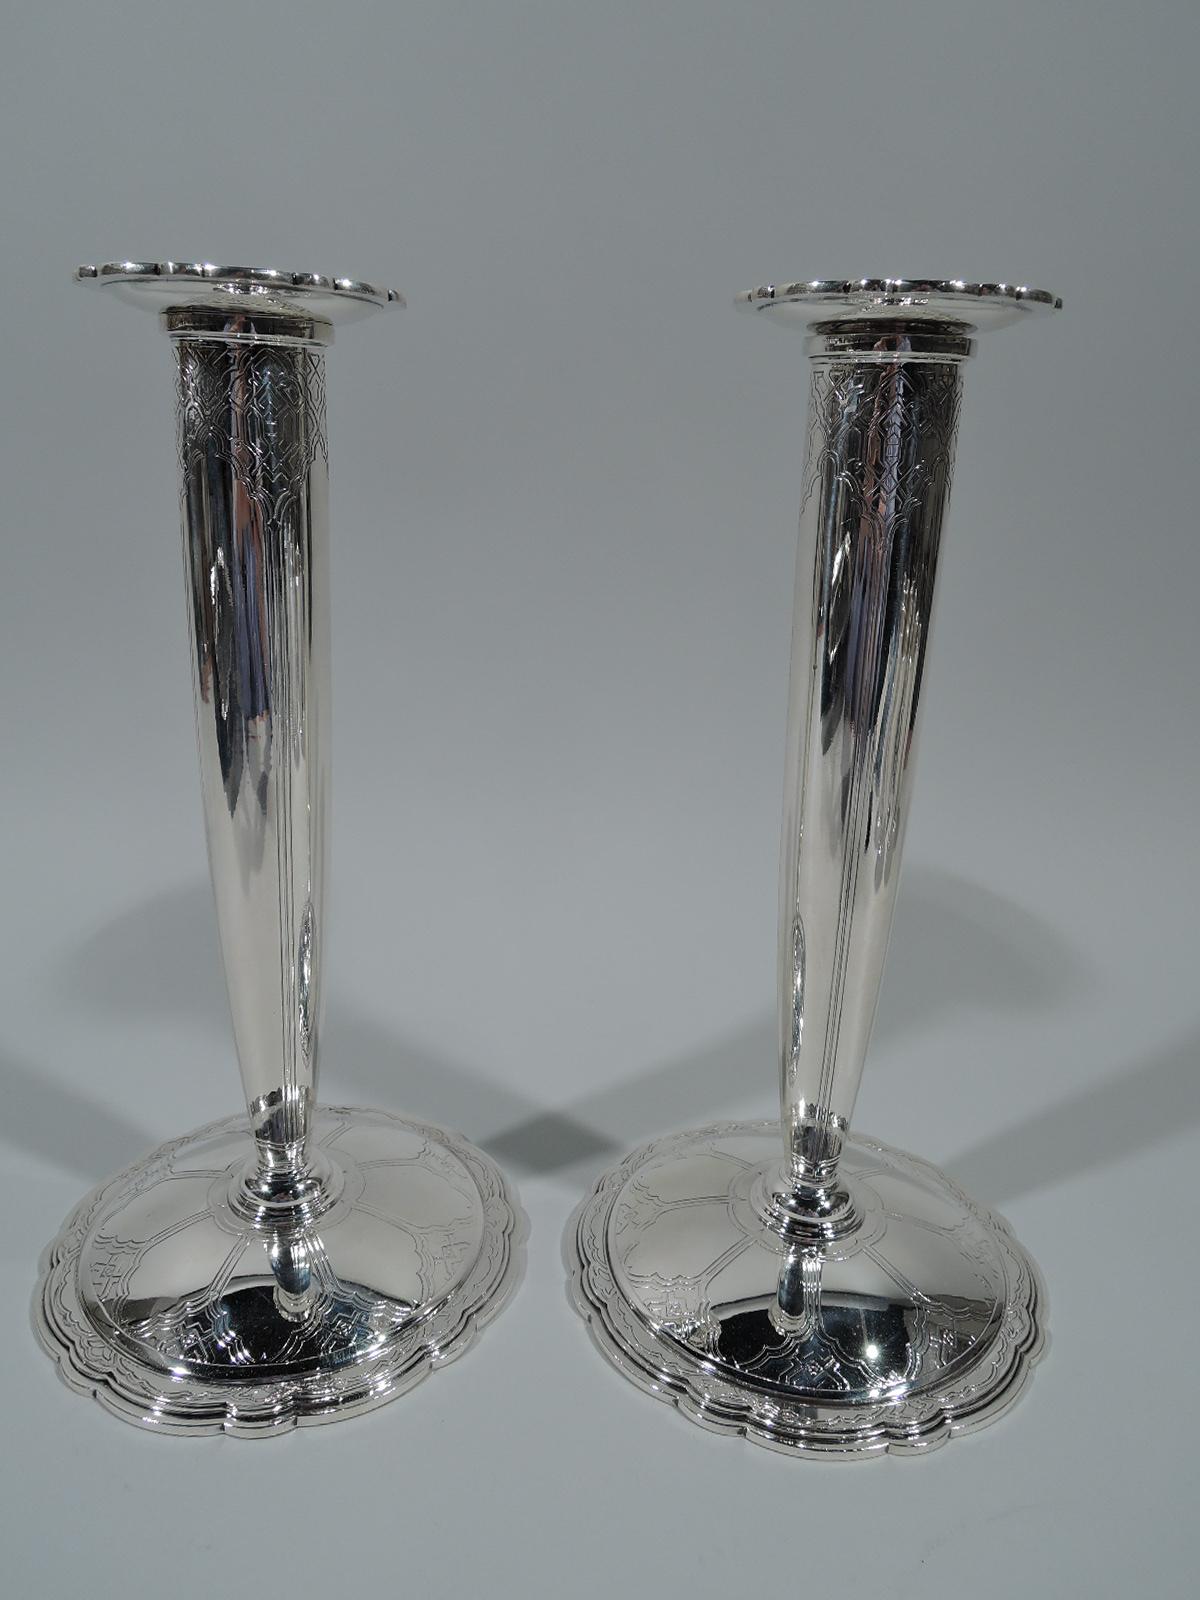 Pair of Art Deco sterling silver candlesticks. Made by Tiffany & Co. in New York. Each: Tapering shaft inset with detachable bobeche. Foot round and raised. Bobeche and foot rims have alternating small and wide scallops. Acid-etched ornament and